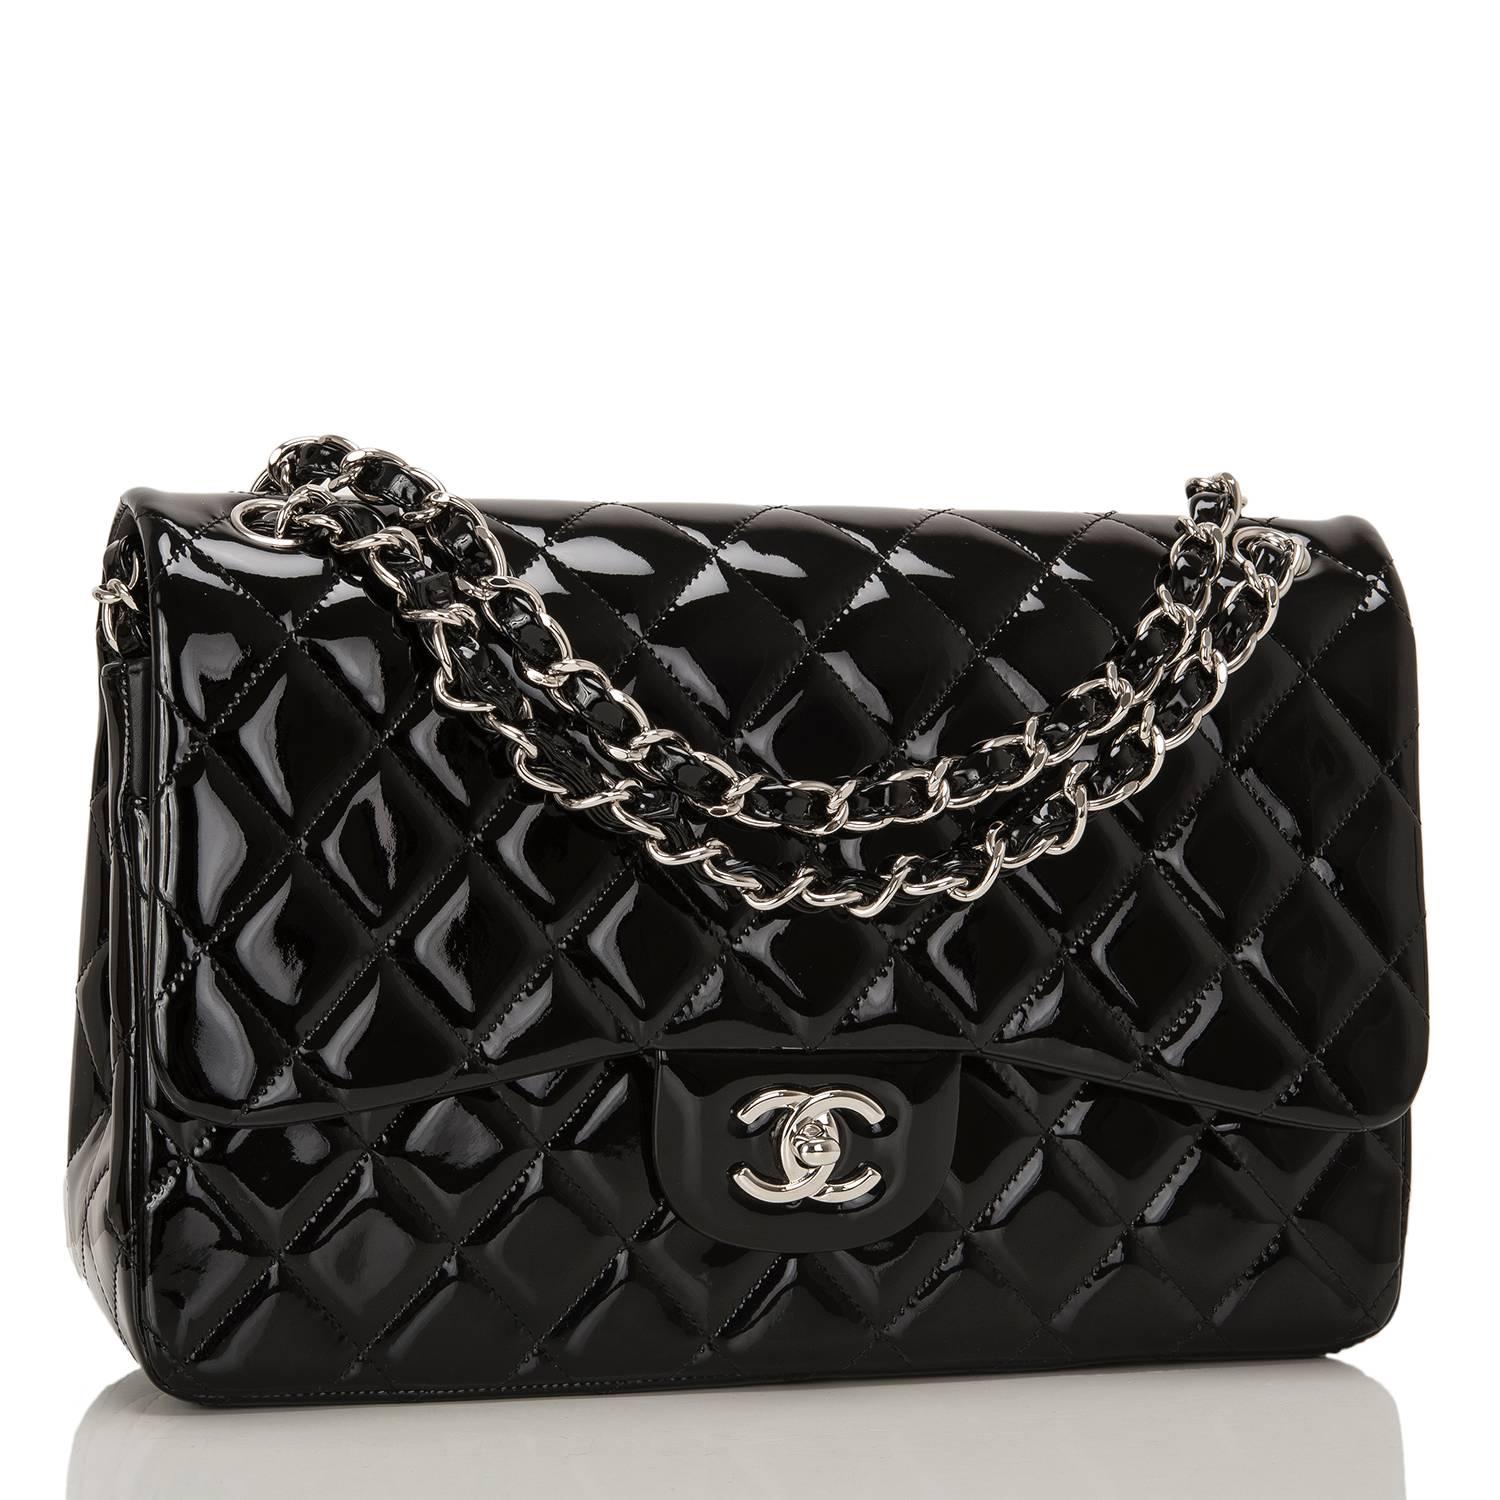 Chanel Jumbo Classic double flap bag of black patent leather with silver tone hardware.

This bag features a front flap with signature CC turnlock closure, a half moon back pocket, and an adjustable interwoven silver tone chain link with black